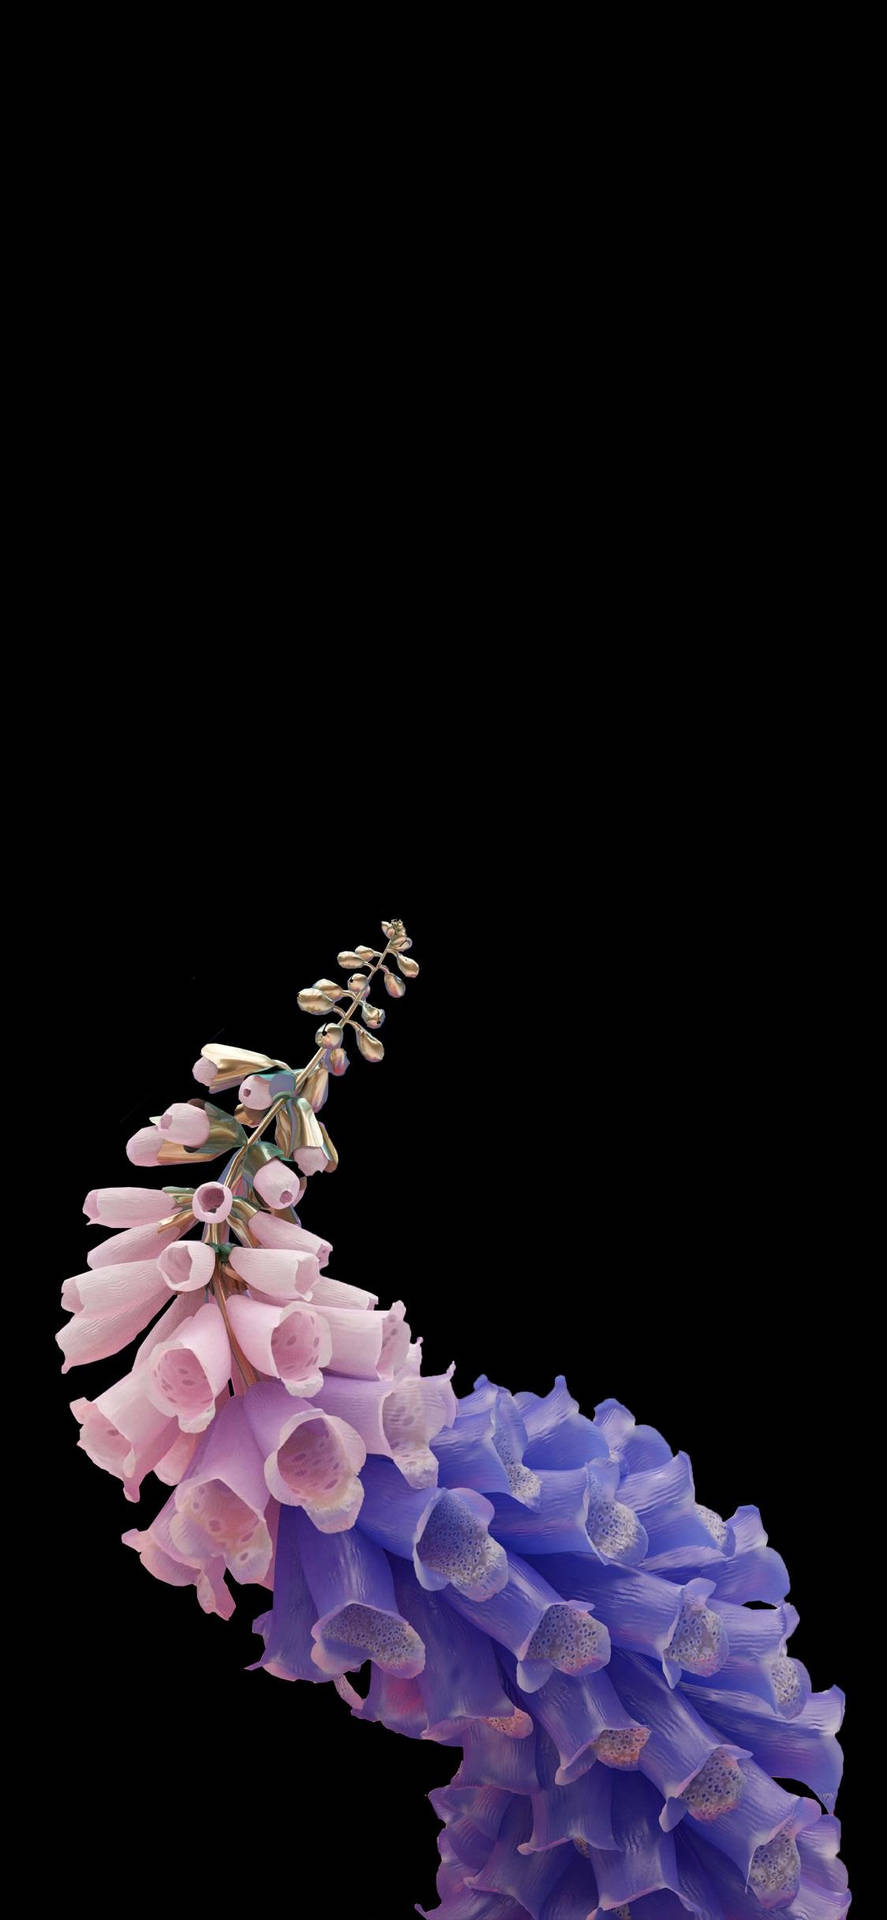 Lady's Glove Flower Oled Iphone Background